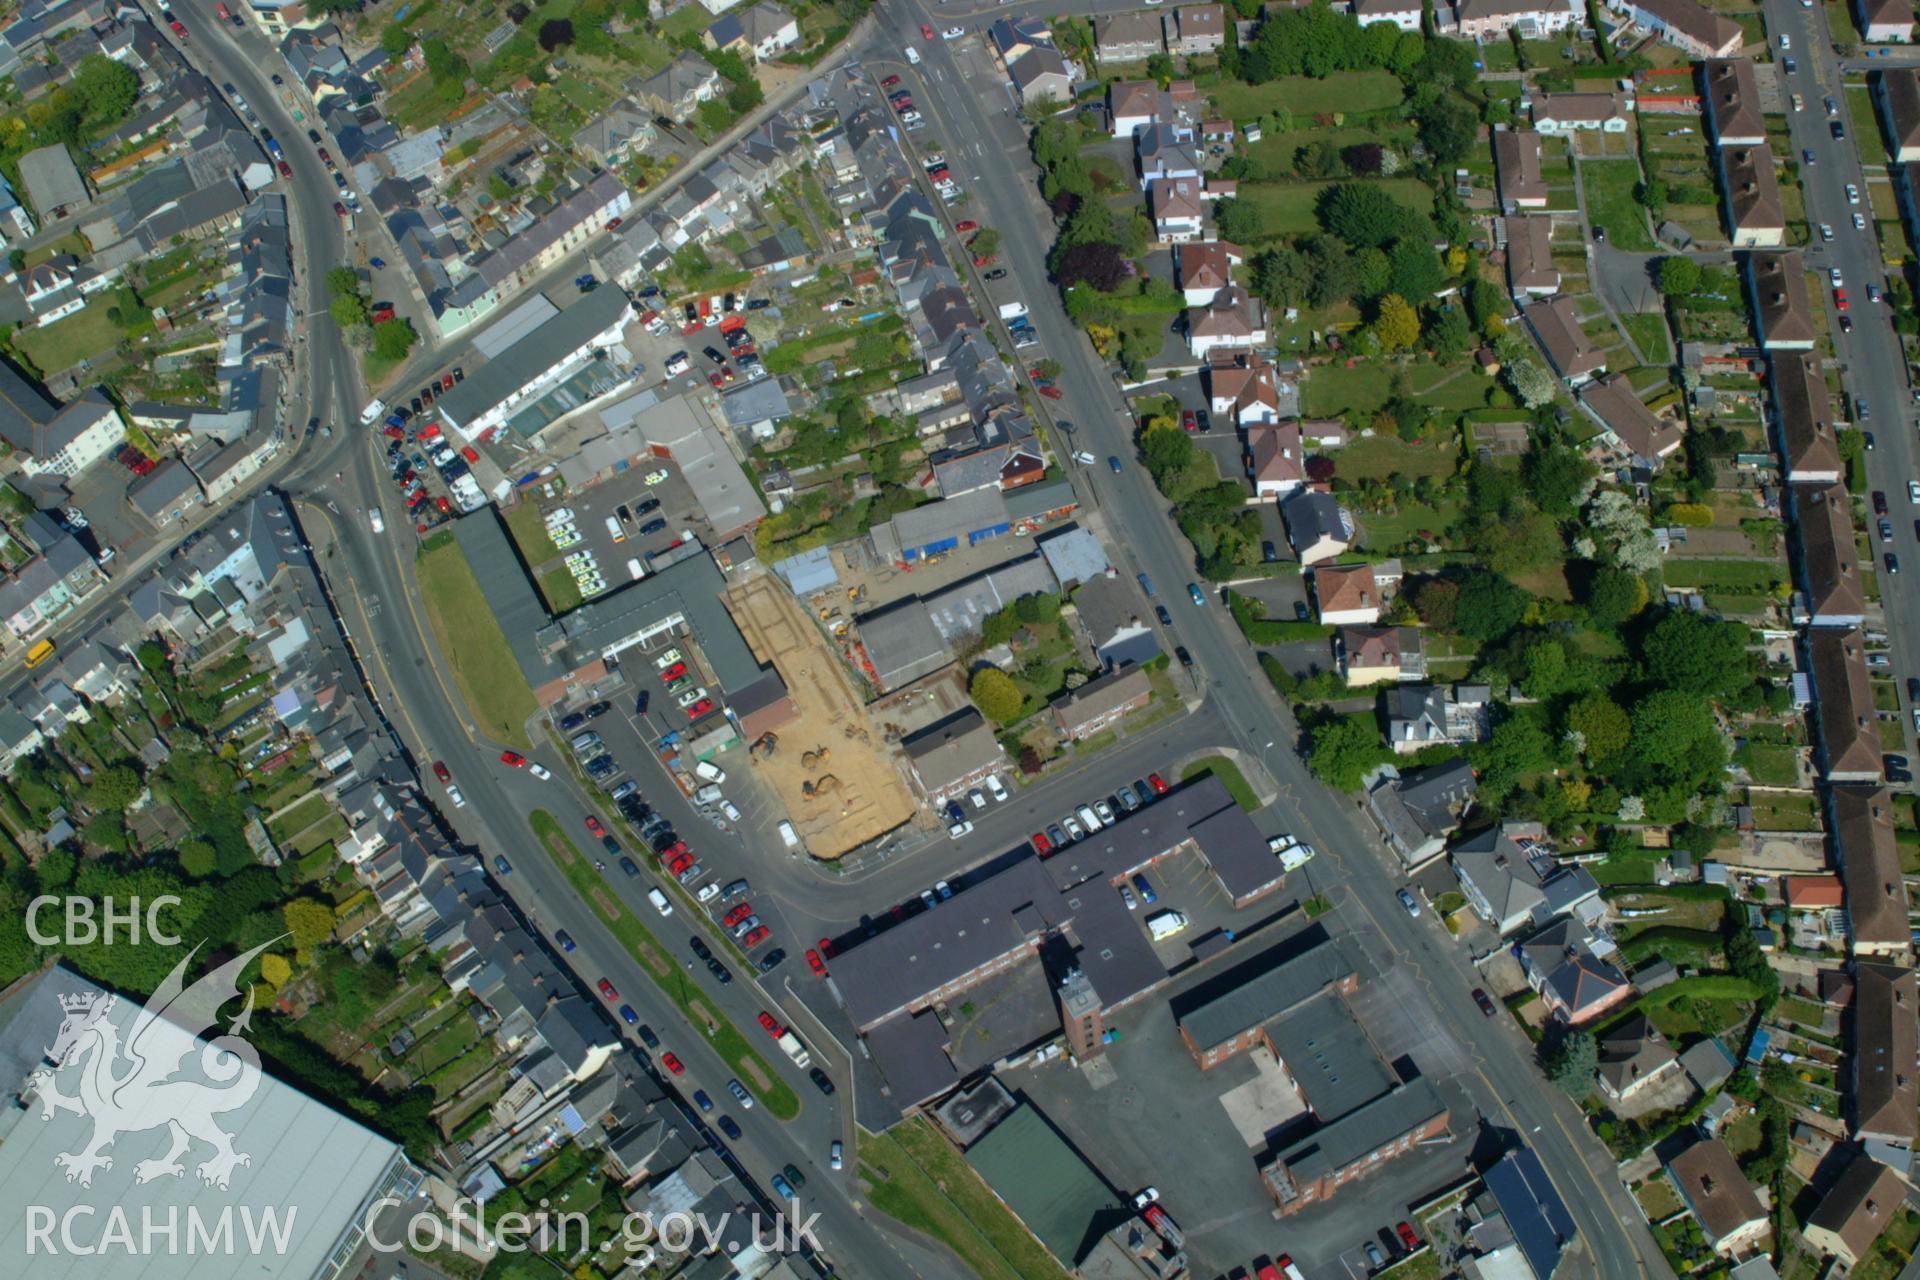 RCAHMW colour oblique aerial photograph of Haverfordwest showing excavations at Merlin's Hill. Taken on 24 May 2004 by Toby Driver